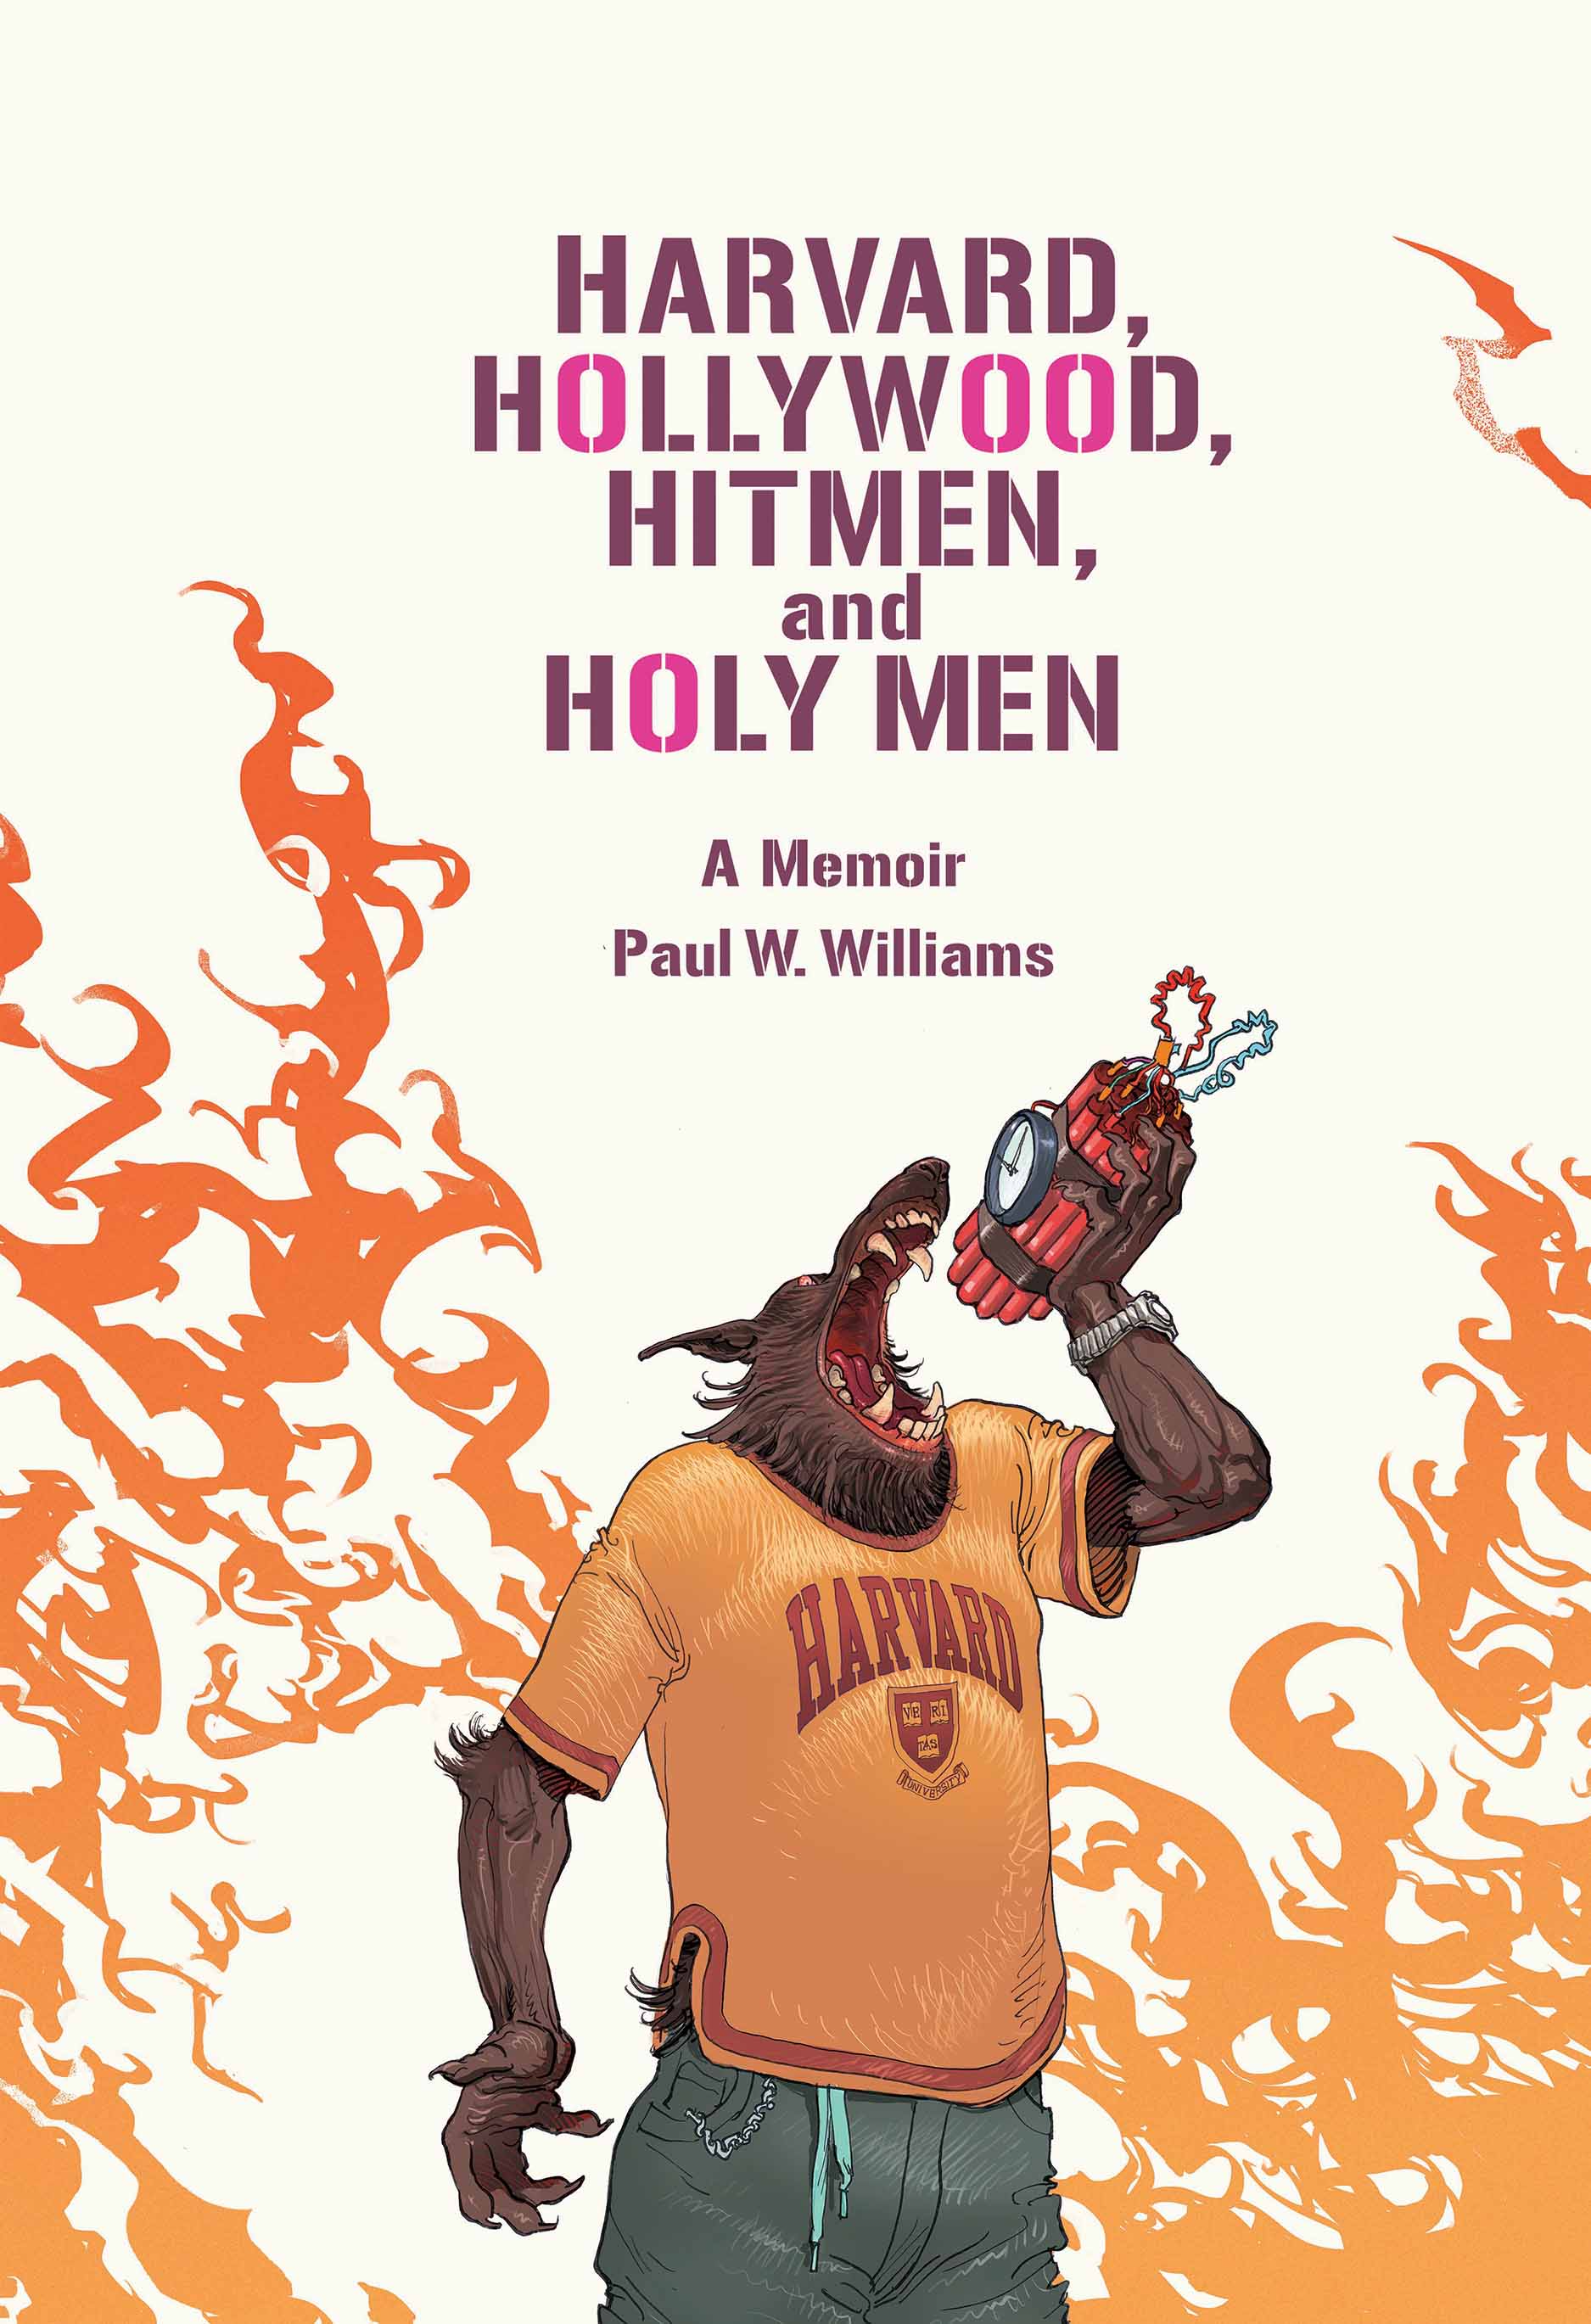 The Kid Stays Out of the Picture: On Paul Williams’s “Harvard, Hollywood, Hitmen, and Holy Men”